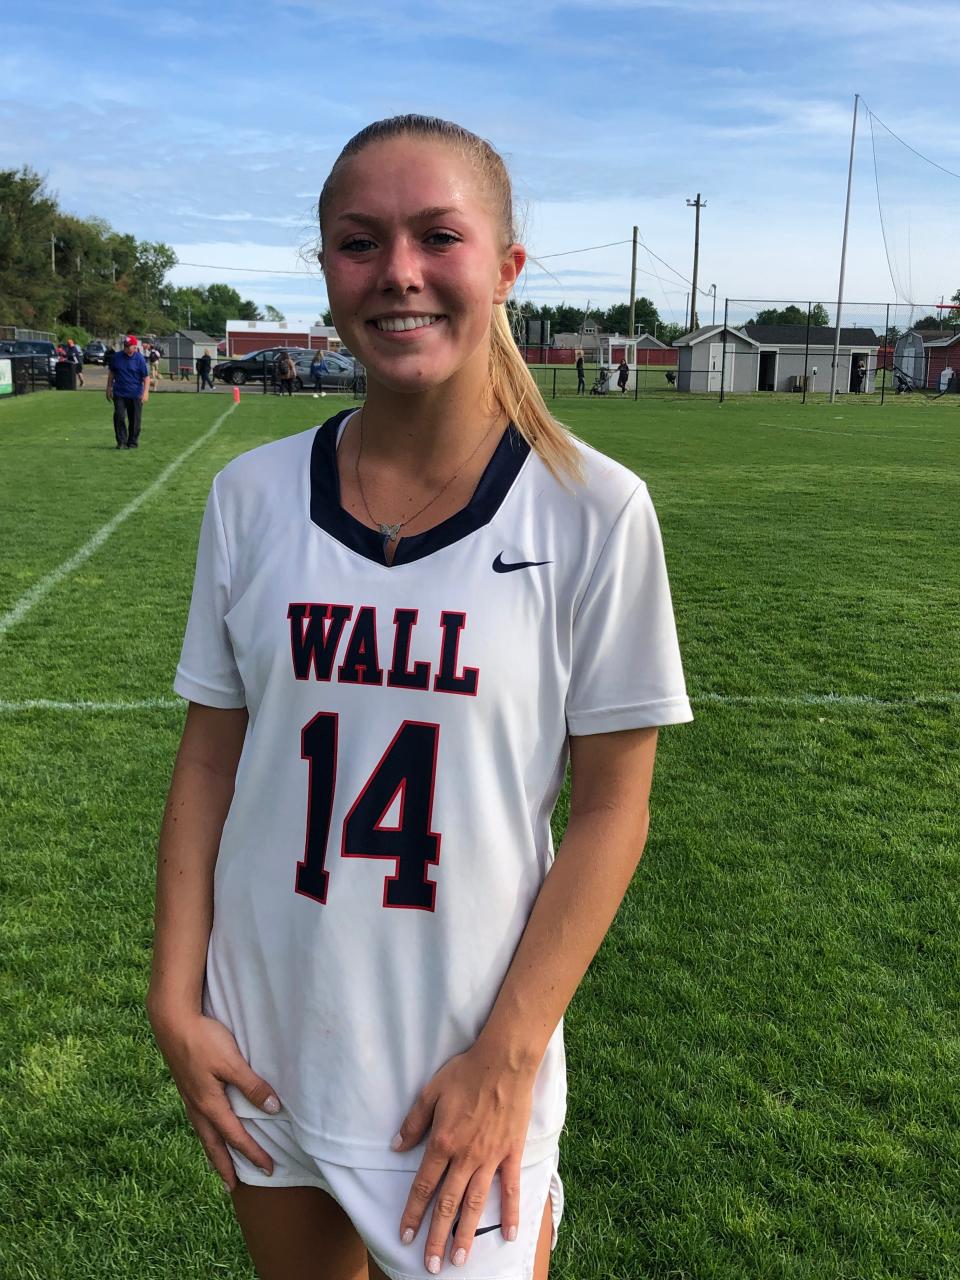 Wall senior Rory Paris talks with the Asbury Park Press following her team's 13-8 win over Barnegat in an NJSIAA South Group 2 Quarterfinal Round Game on May 24, 2022.